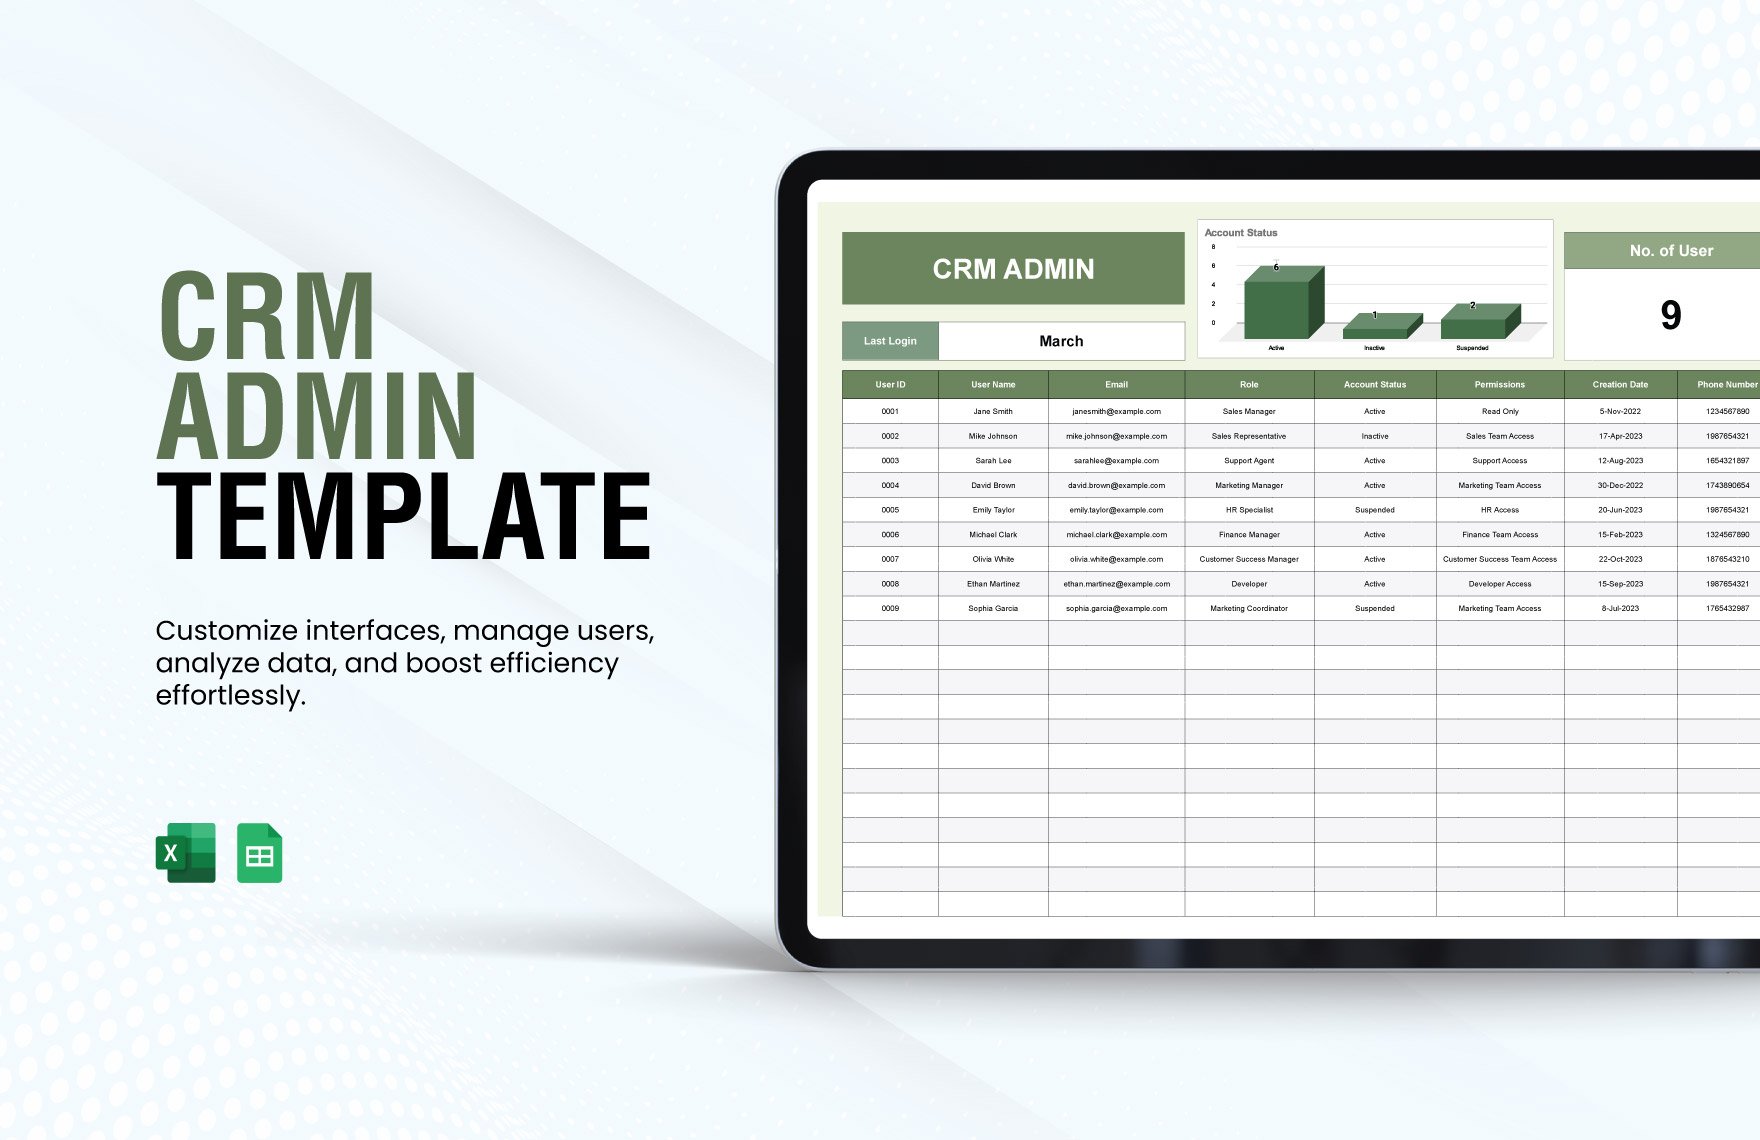 CRM Admin Template in Excel, Google Sheets